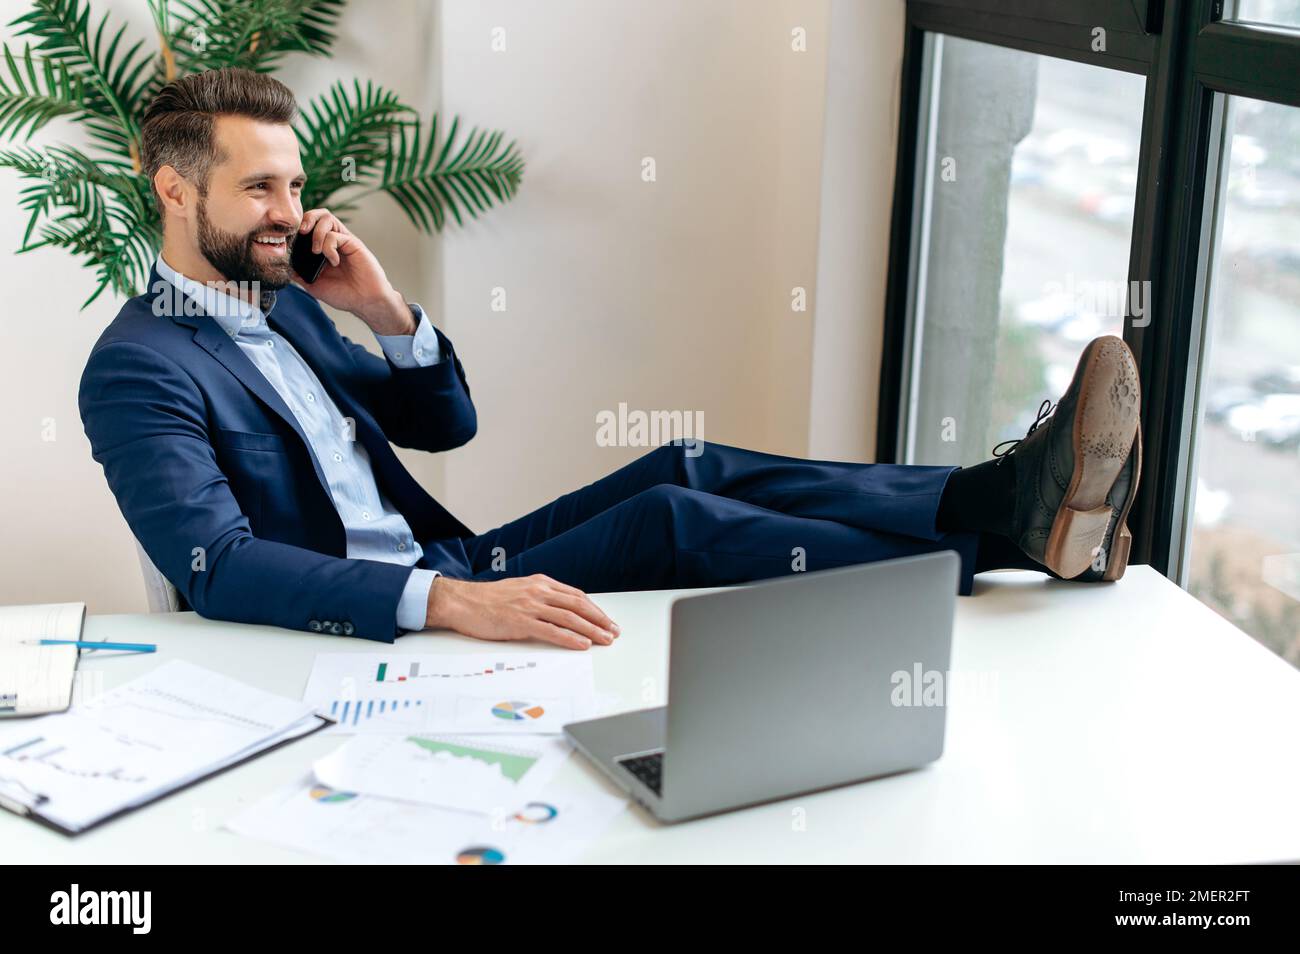 Happy elegant caucasian business man, manager, director, sits at a desk in the office, talking on the phone with a colleague or client, putting his legs on the table, making an appointment, smiling Stock Photo